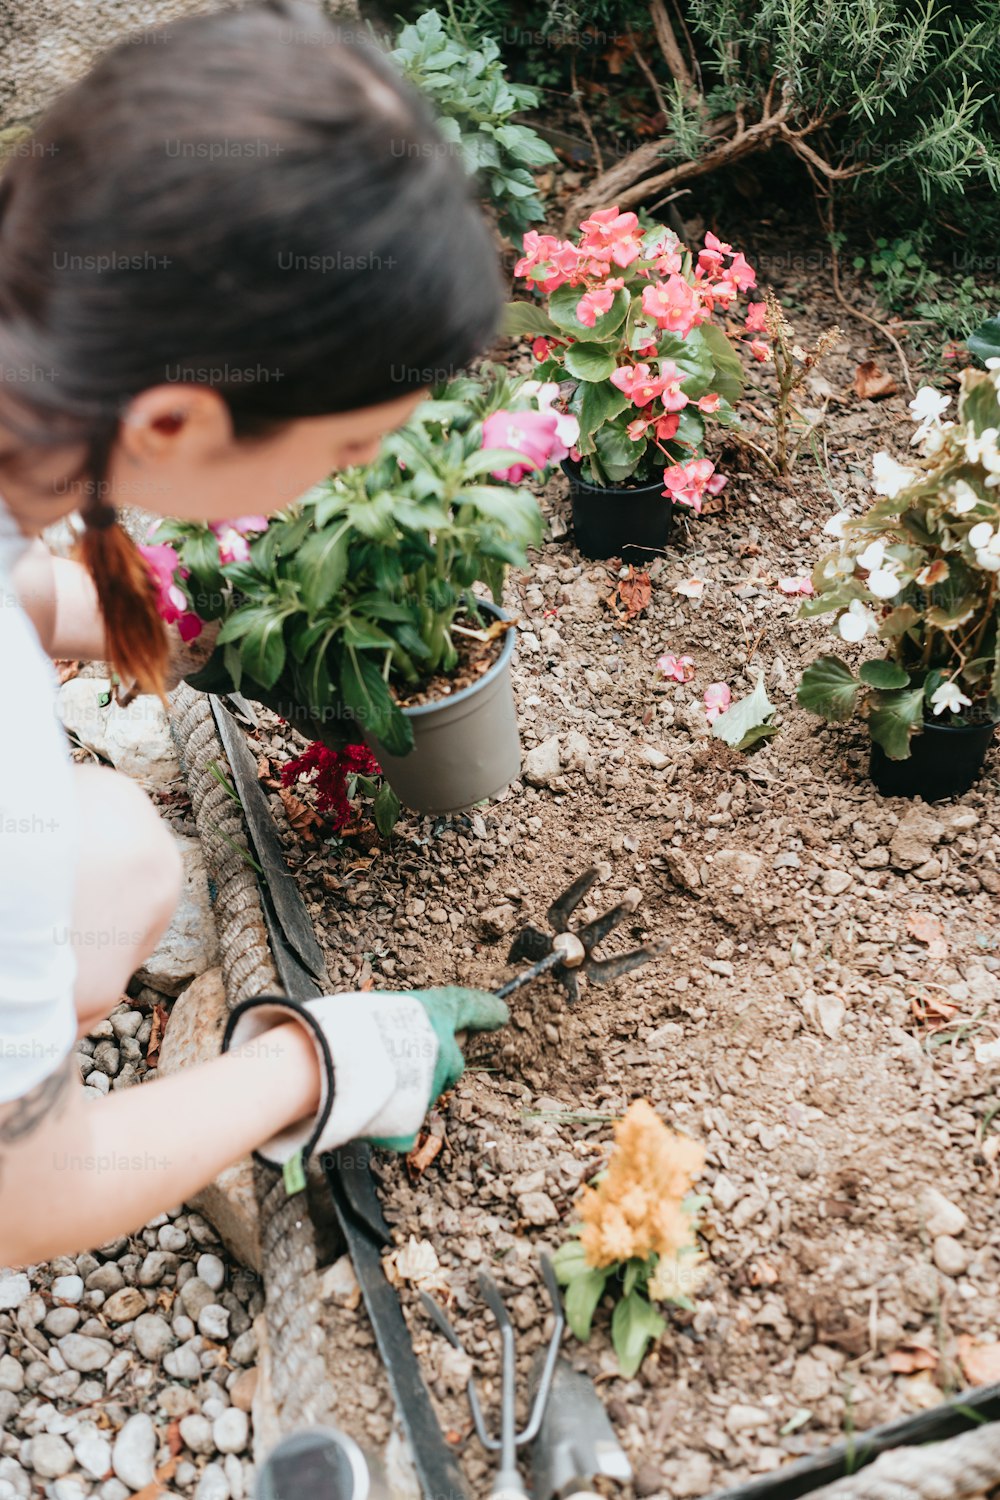 a woman working in a garden with flowers